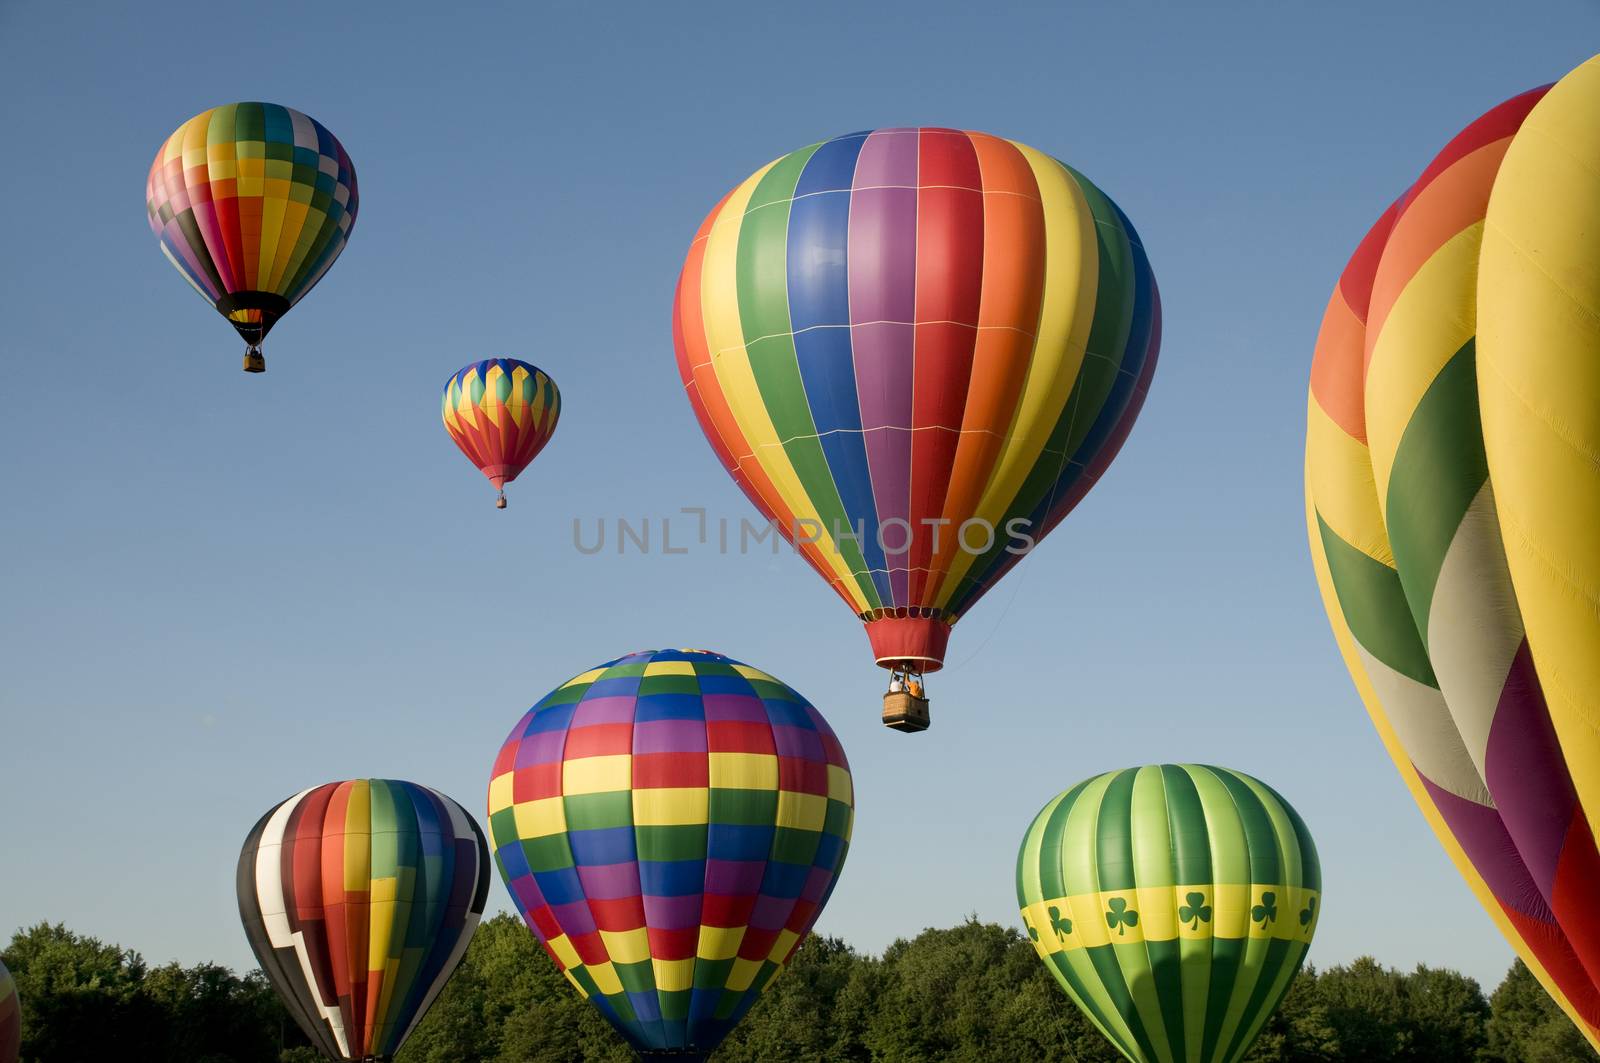 Various hot-air balloons with colorful envelopes ascending or launching at a ballooning festival